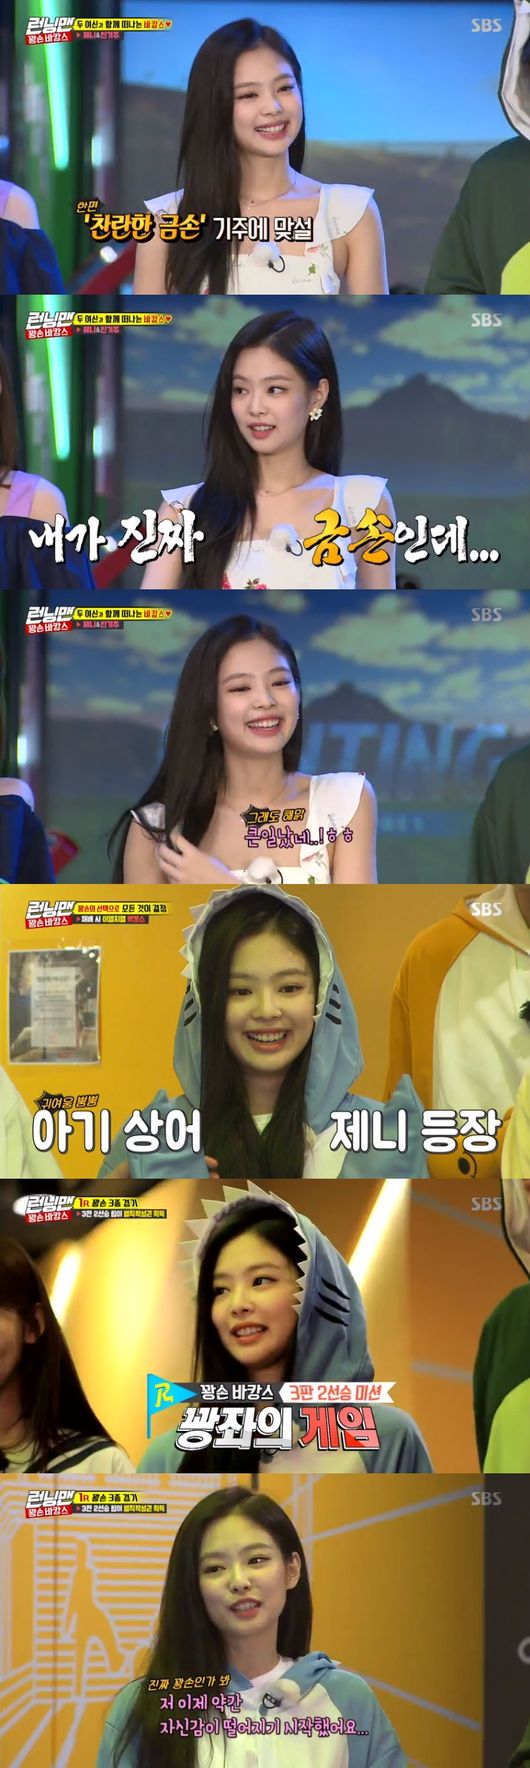 Girl group Black Pink Jenny Kim added indulge video.Jenny Kim, who had been attracting attention as a horror room experience video in her last appearance, made a Running Man video soon after she played a bigger role in re-appearing.Jenny Kim appeared fully adapted to entertainment, while re-starring on SBS Running Man broadcast on the 12th.Earlier, Jenny Kim wrote a Legend when she first visited Running Man with member JiSoo.In the name of Game partner Lee Kwang-soo, he revealed his sense of Lets have a drink together at the time of building the third act, and laughed at the Chain Reaction over the coward Lee Kwang-soo at the Water Park mission.Jenny Kim, who was tearful out of the horror room, became a big topic.The video has surpassed 3 million views in total, including 1 million views on a portal site, major portals, VODs, and SNS figures, and was selected as the best entertainment star of 2018 by Running Man.Jenny Kim, who has found Running Man again, has made the entire Running Man as a big success beyond her past performance.In particular, Jenny Kim has been on a re-challenge in the triangular era of charm, and Jenny Kim has turned the recording scene upside down by saying, How about this, Gwangsu, Wednesday?Lee Kwang-soo was excited that I am completely free on Wednesday.Haha asked Jenny Kim, What are you doing on Wednesday? Jenny Kim said, I have a job in Japan.I can not do it. He laughed at the sense of reversal.Jenny Kims storm Chain Reaction, which also connects horror room experience videos, shone in Tactile Game with Song Ji-hyo.Jenny Kim had to choose a Porto Rosso shell, cover her eyes with Song Ji-hyo and only guess her identity with the touch of the ball.At this time, I screamed at the feeling of the first Porto Rosso shell and gave a Chain Reaction of the past.Although he did not get the right answer, he once again created Legend video.As a result, Jenny Kim sometimes showed the aspect of Kangson, but she became the goddess of victory in the reverse and led the final team.The reaction of viewers who want to see Jenny Kim who writes Legend every time it comes out like this is also hot.Running Man soon became a video of Jenny Kim.Capture the broadcast screen for Running Man.